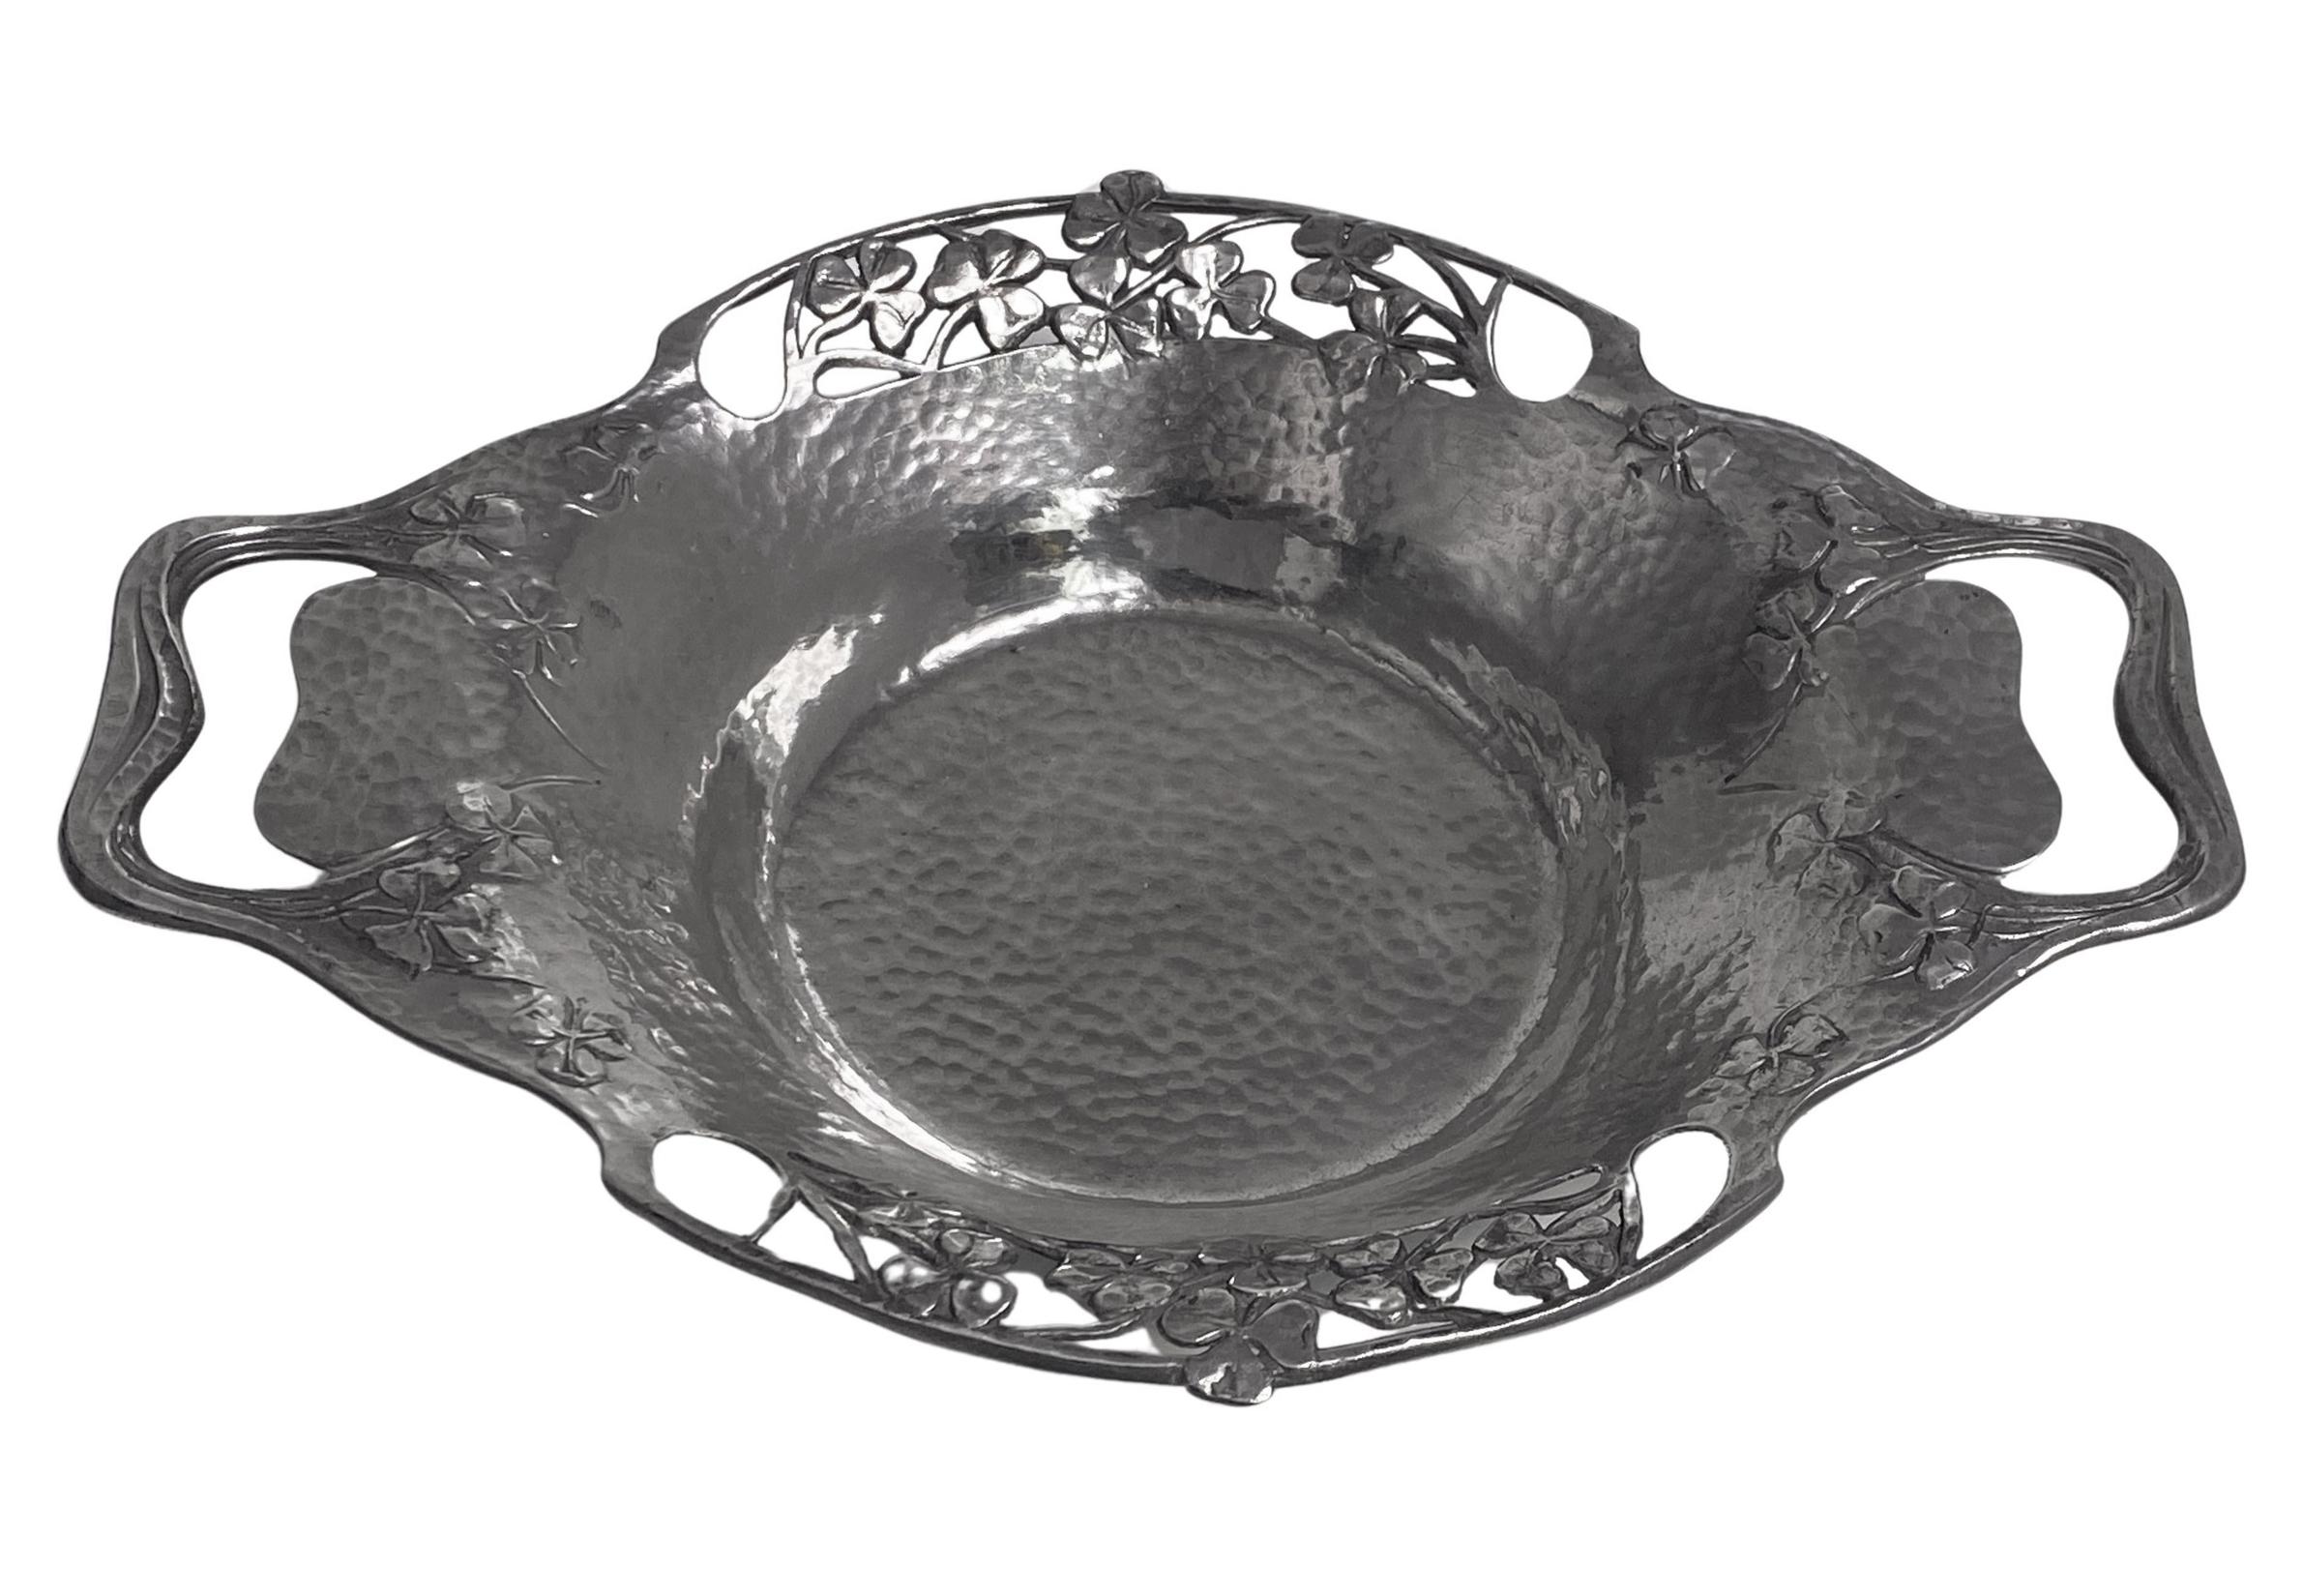 Liberty Arts and Crafts Tudric Pewter Dish, Liberty & Co, English, circa 1903. The two handled hammered dish with stylized cut out handles in a heart shape with a pierced surround of shamrocks, welled interior. Stamped Made in England 0287